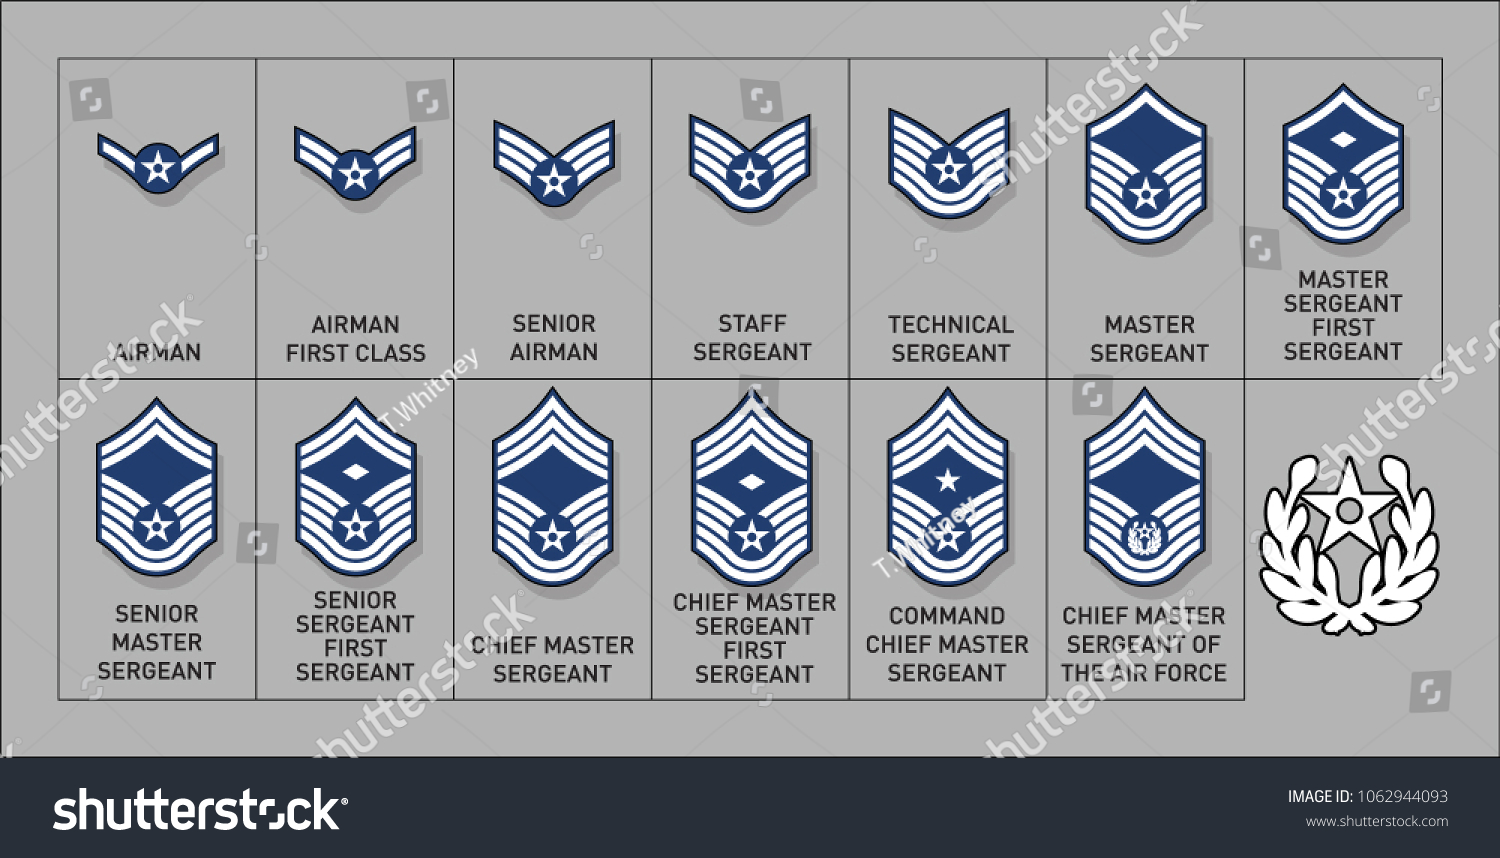 329 Enlisted air force stripes Images, Stock Photos & Vectors ...